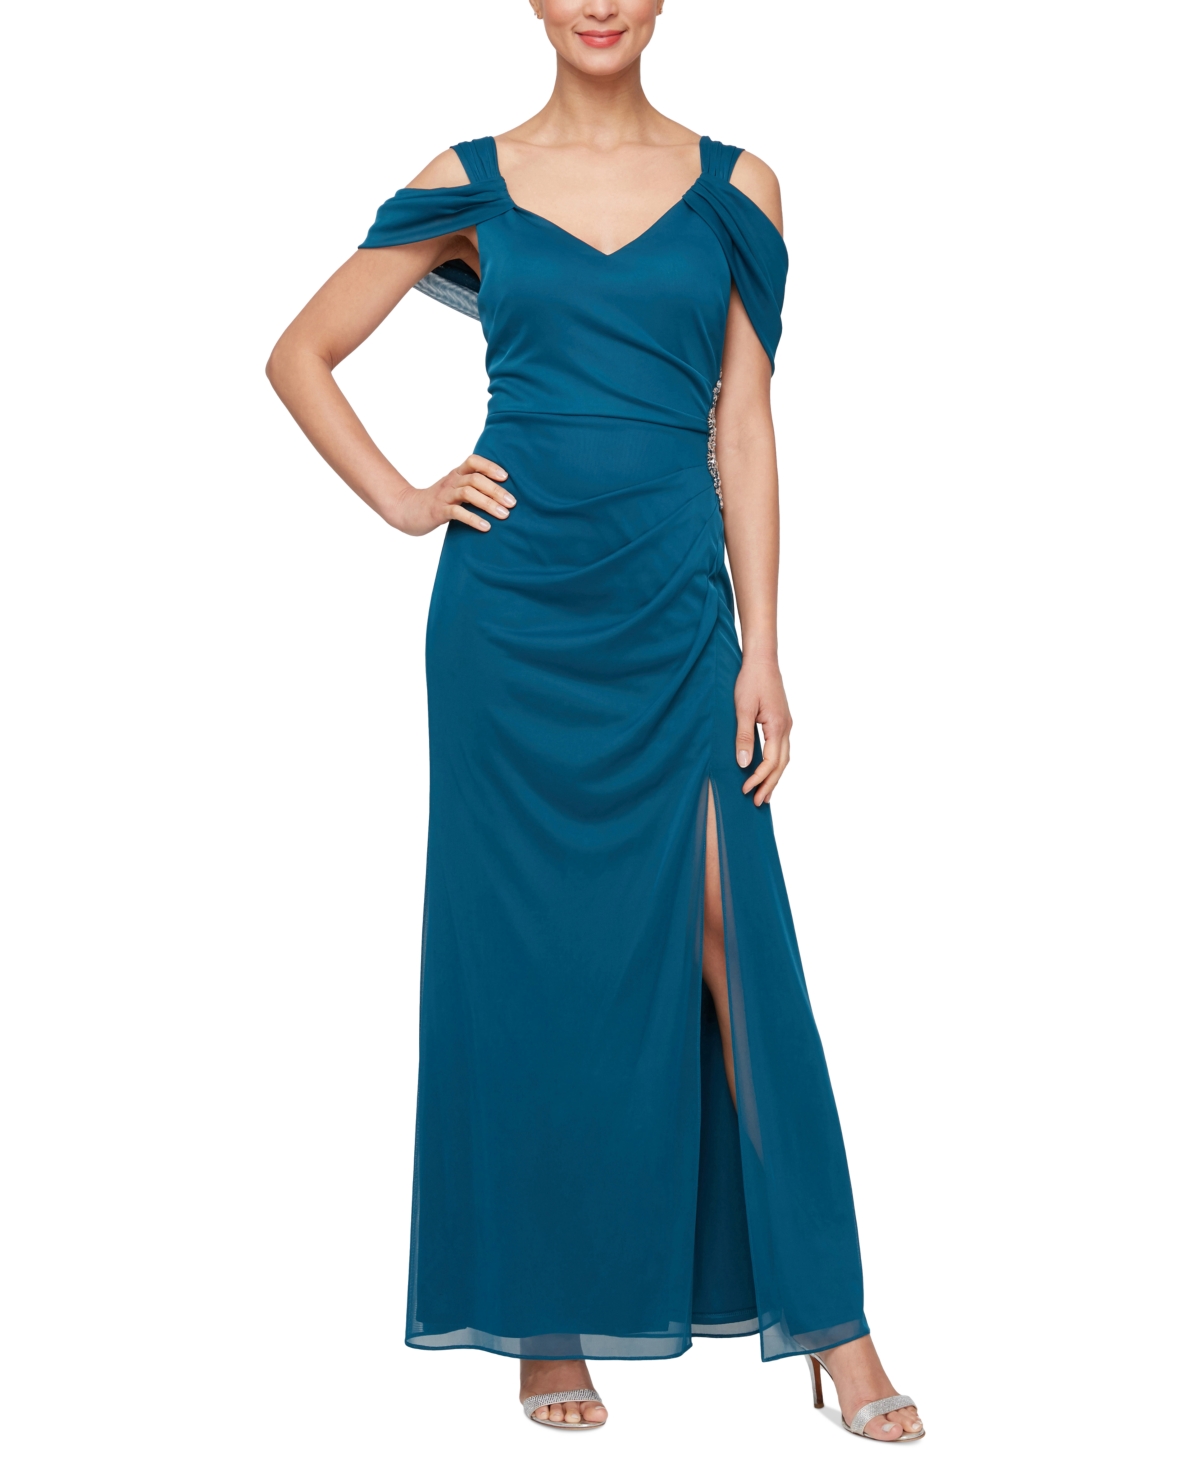 Women's Embellished Draped Cold Shoulder Gown - Peacock